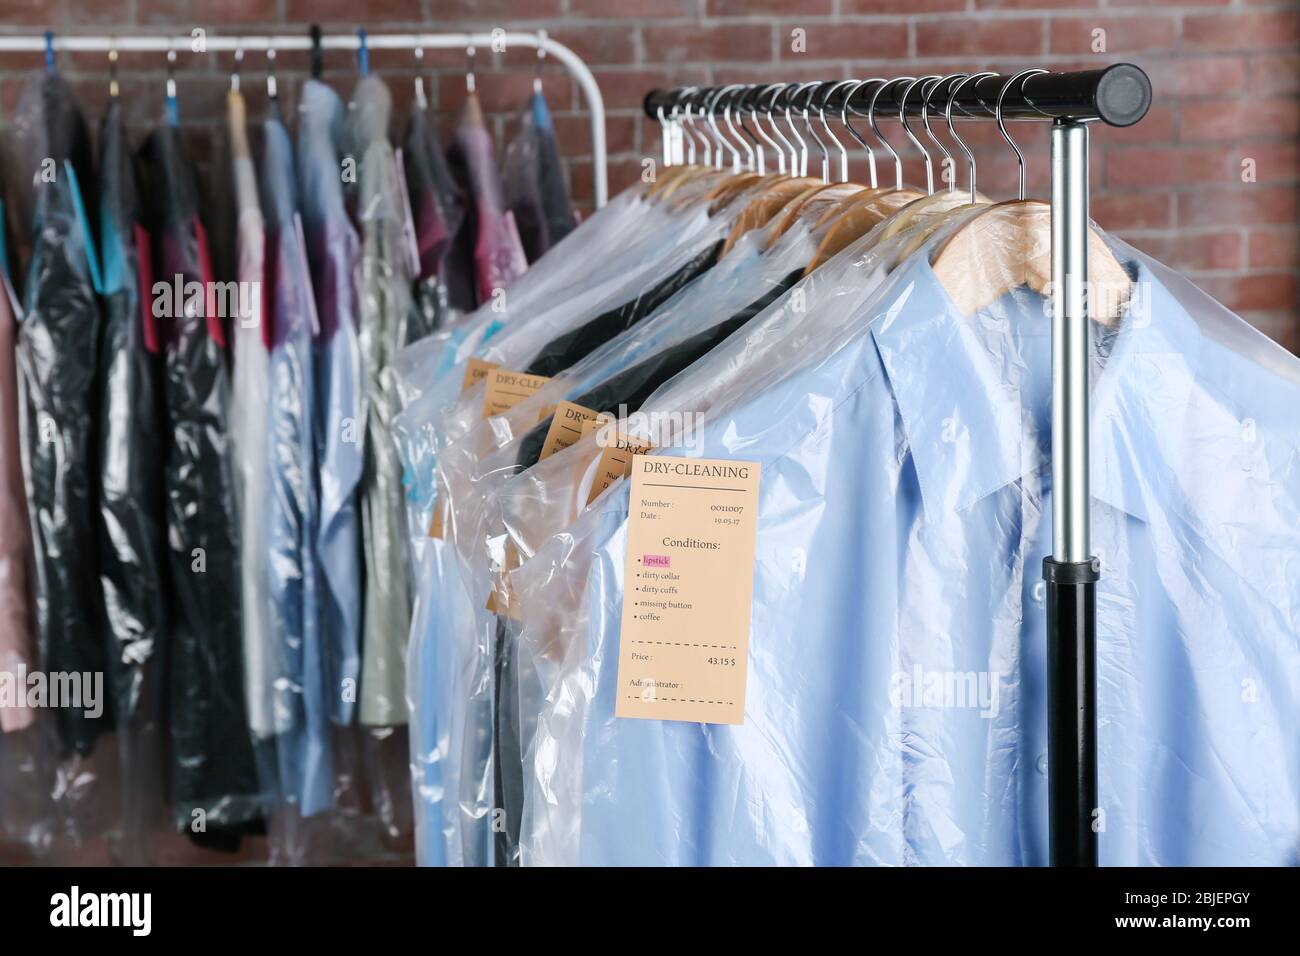 https://c8.alamy.com/comp/2BJEPGY/rack-of-clean-clothes-hanging-on-hangers-at-dry-cleaning-2BJEPGY.jpg